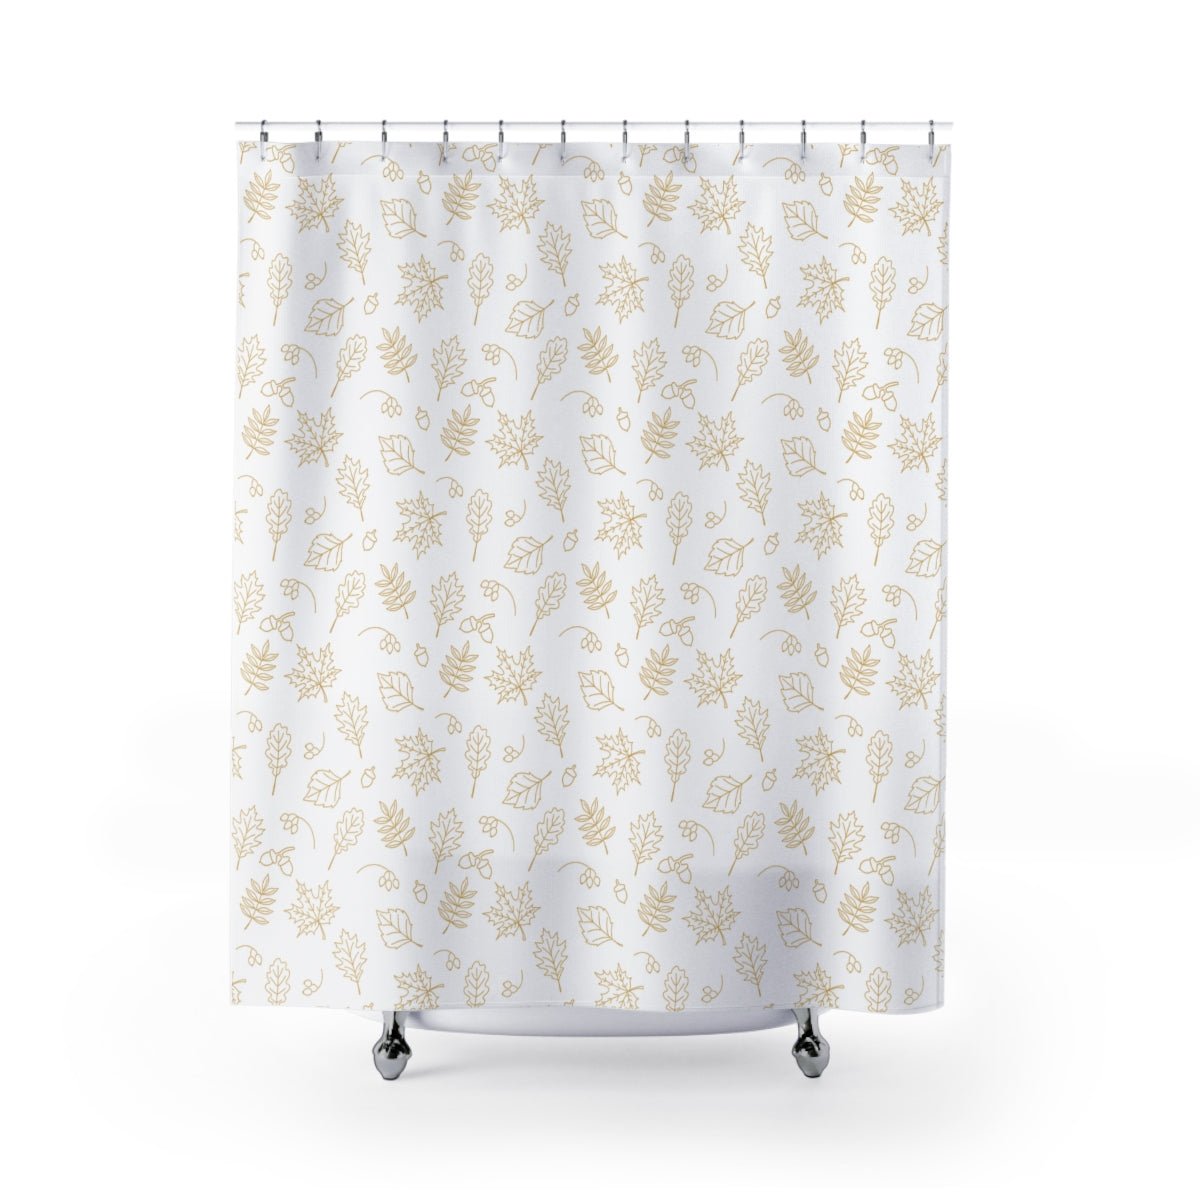 Acorns and Leaves Shower Curtains - Puffin Lime